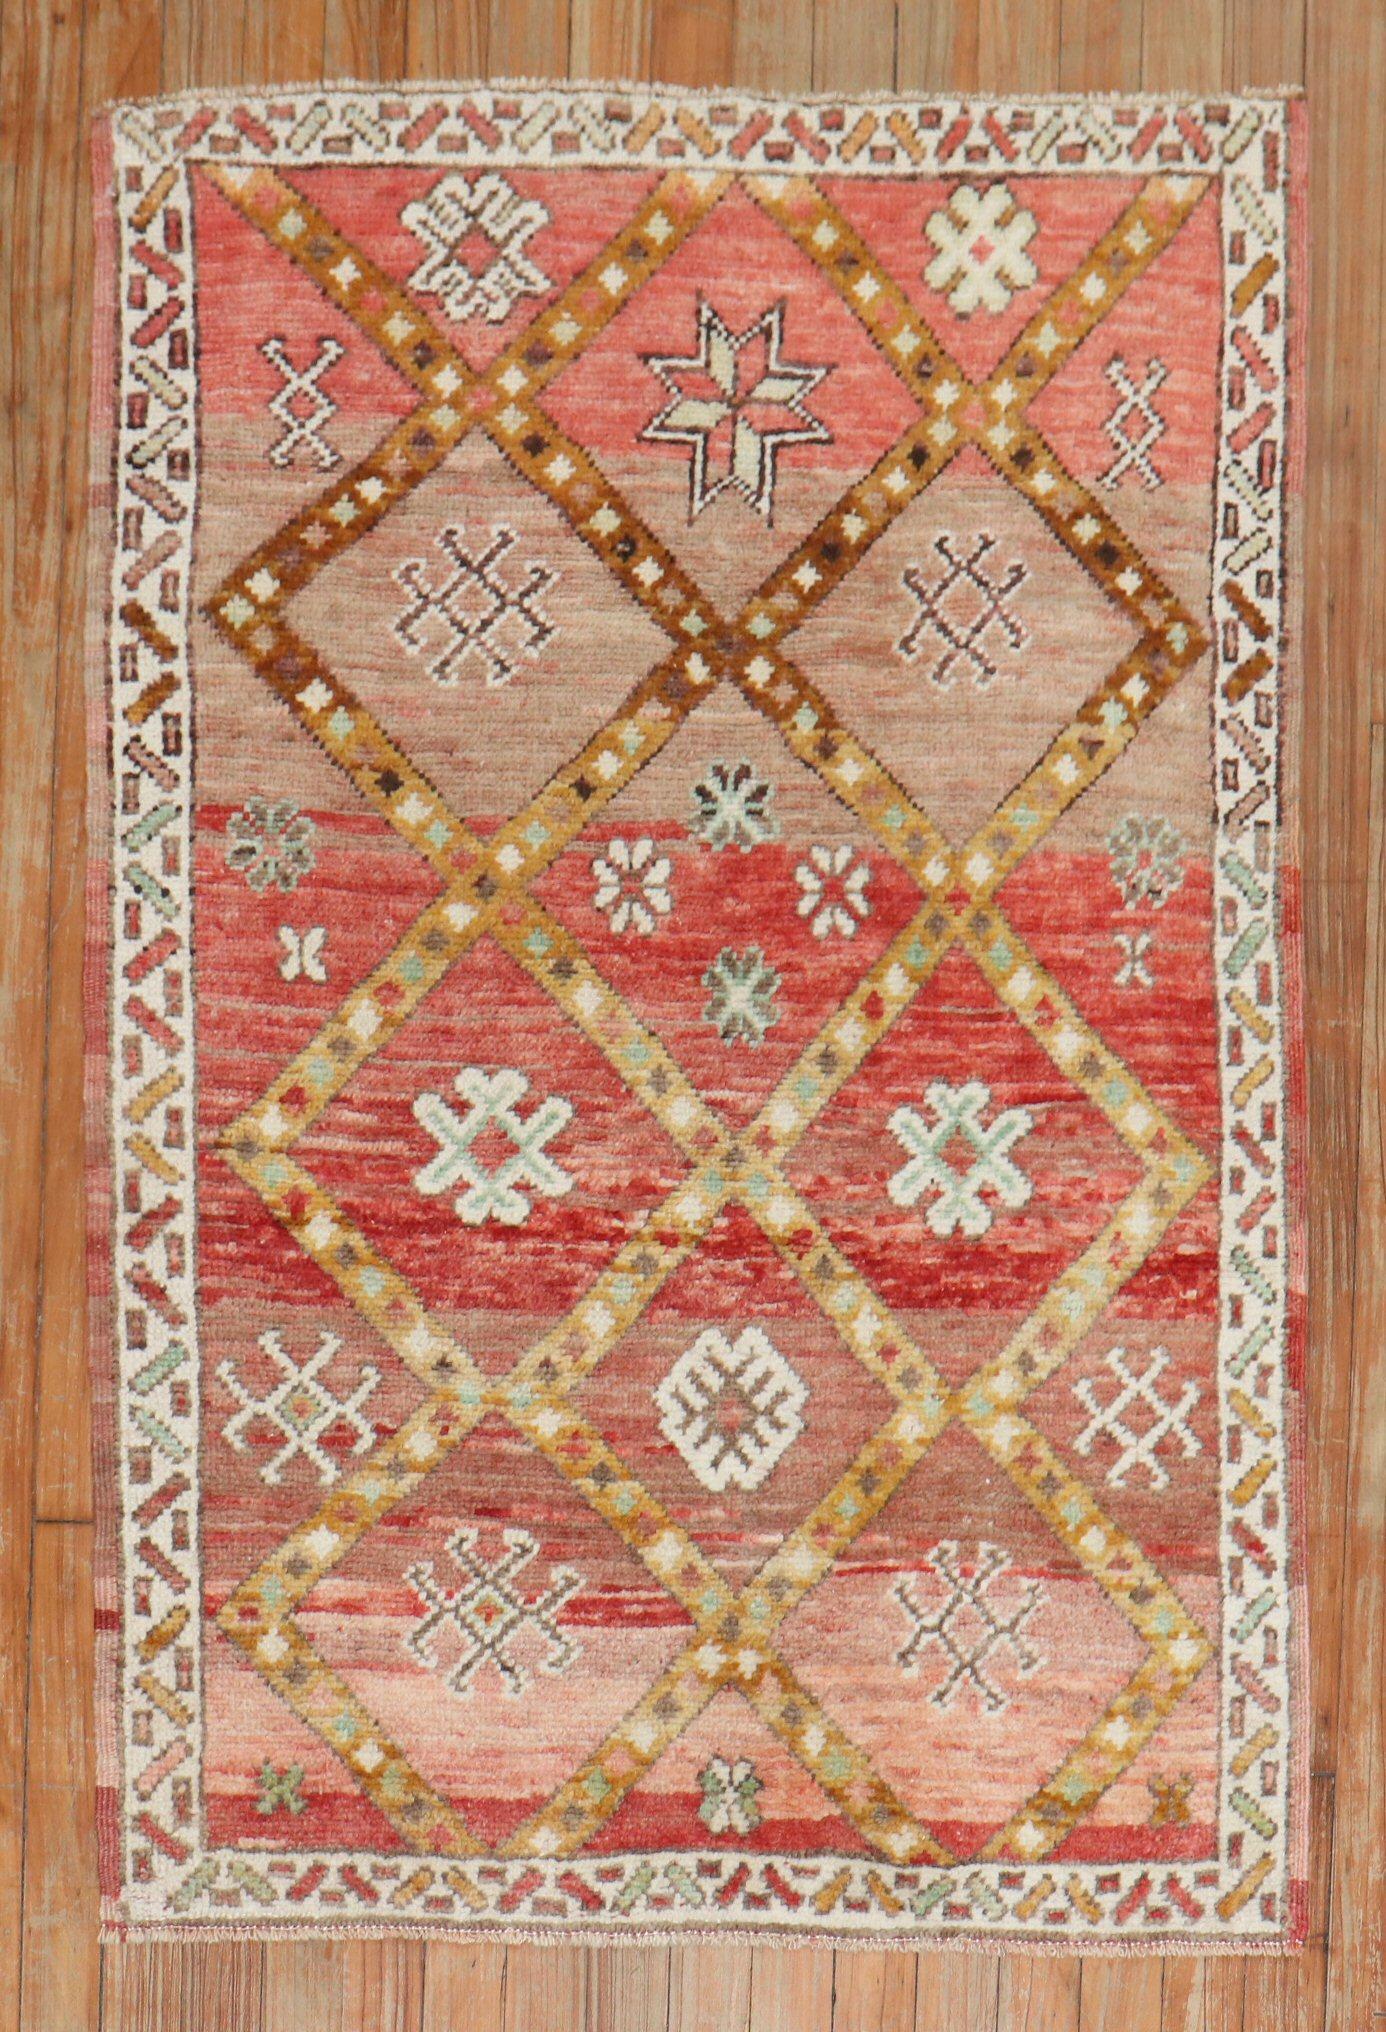 An early 20th century Moroccan Scatter size rug

Measures: 2'10'' x 4'2''.